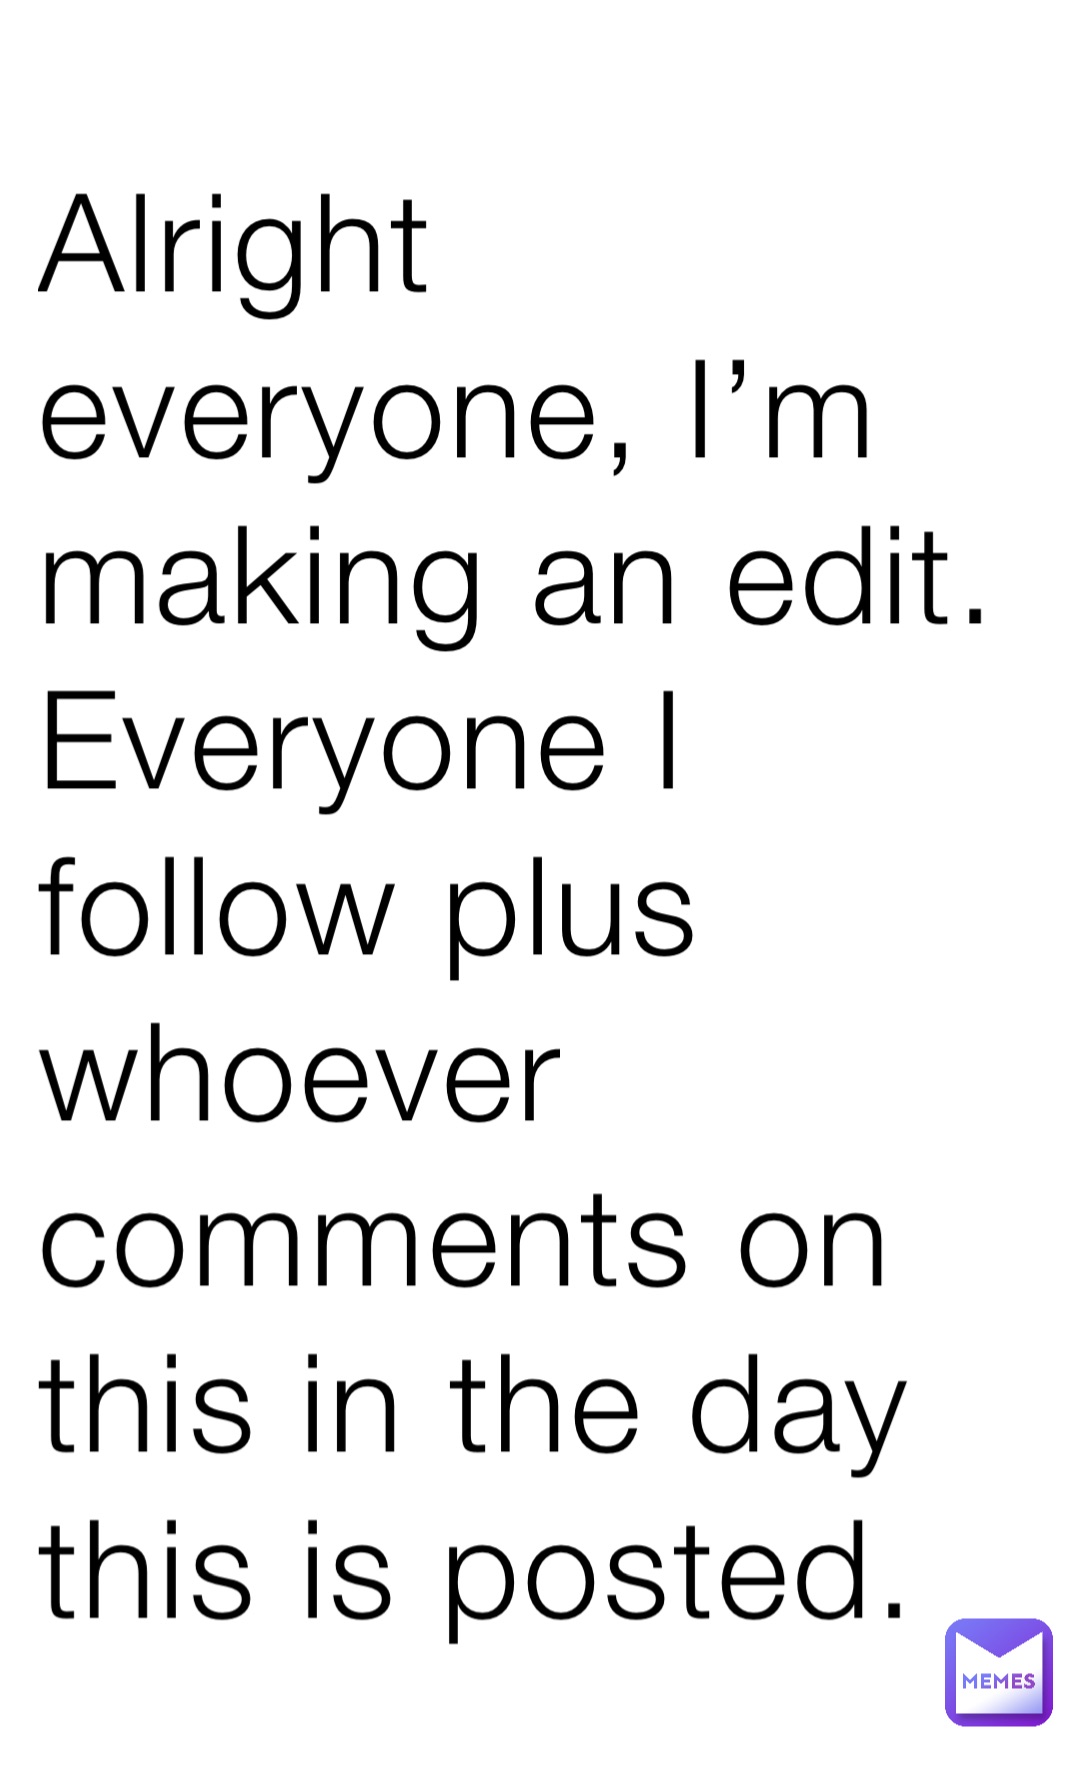 Alright everyone, I’m making an edit. Everyone I follow plus whoever comments on this in the day this is posted.